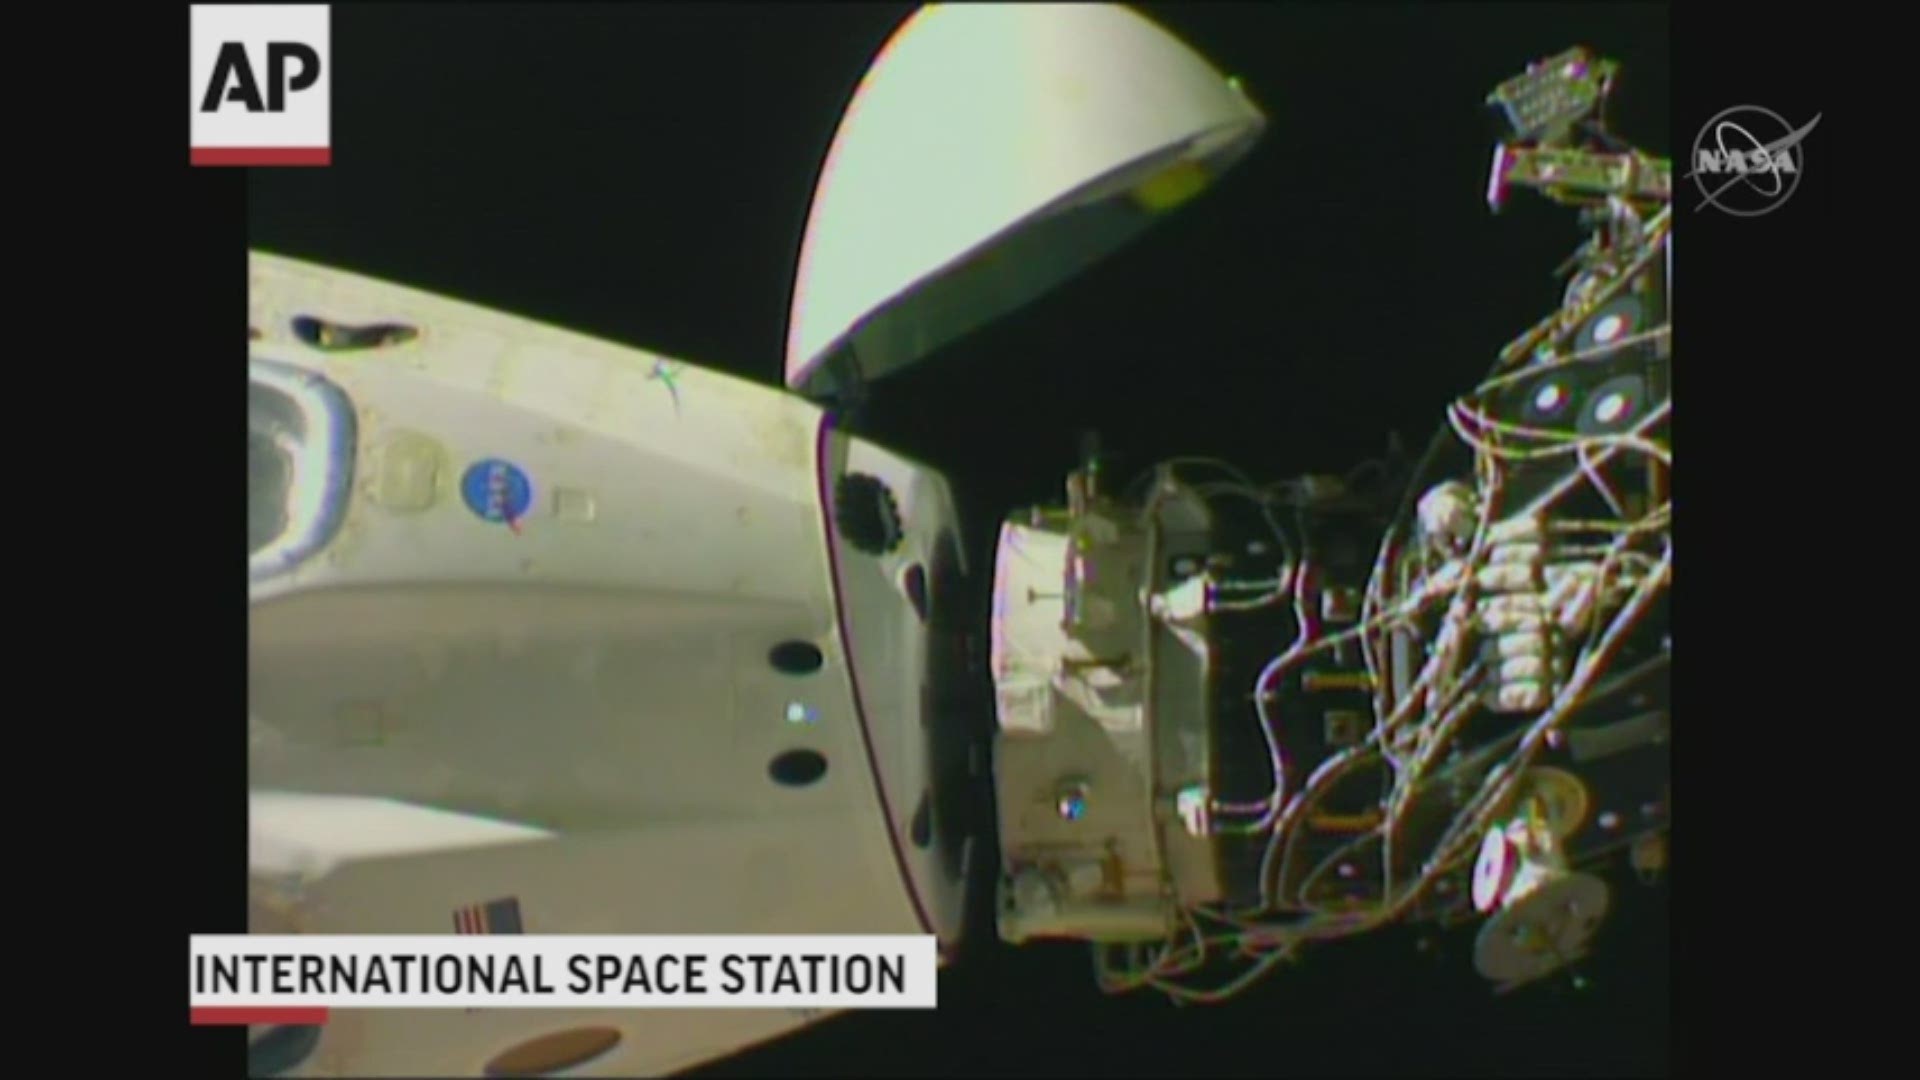 The new SpaceX capsule undocked from International Space Station early Friday, ahead of its return to earth. (AP)